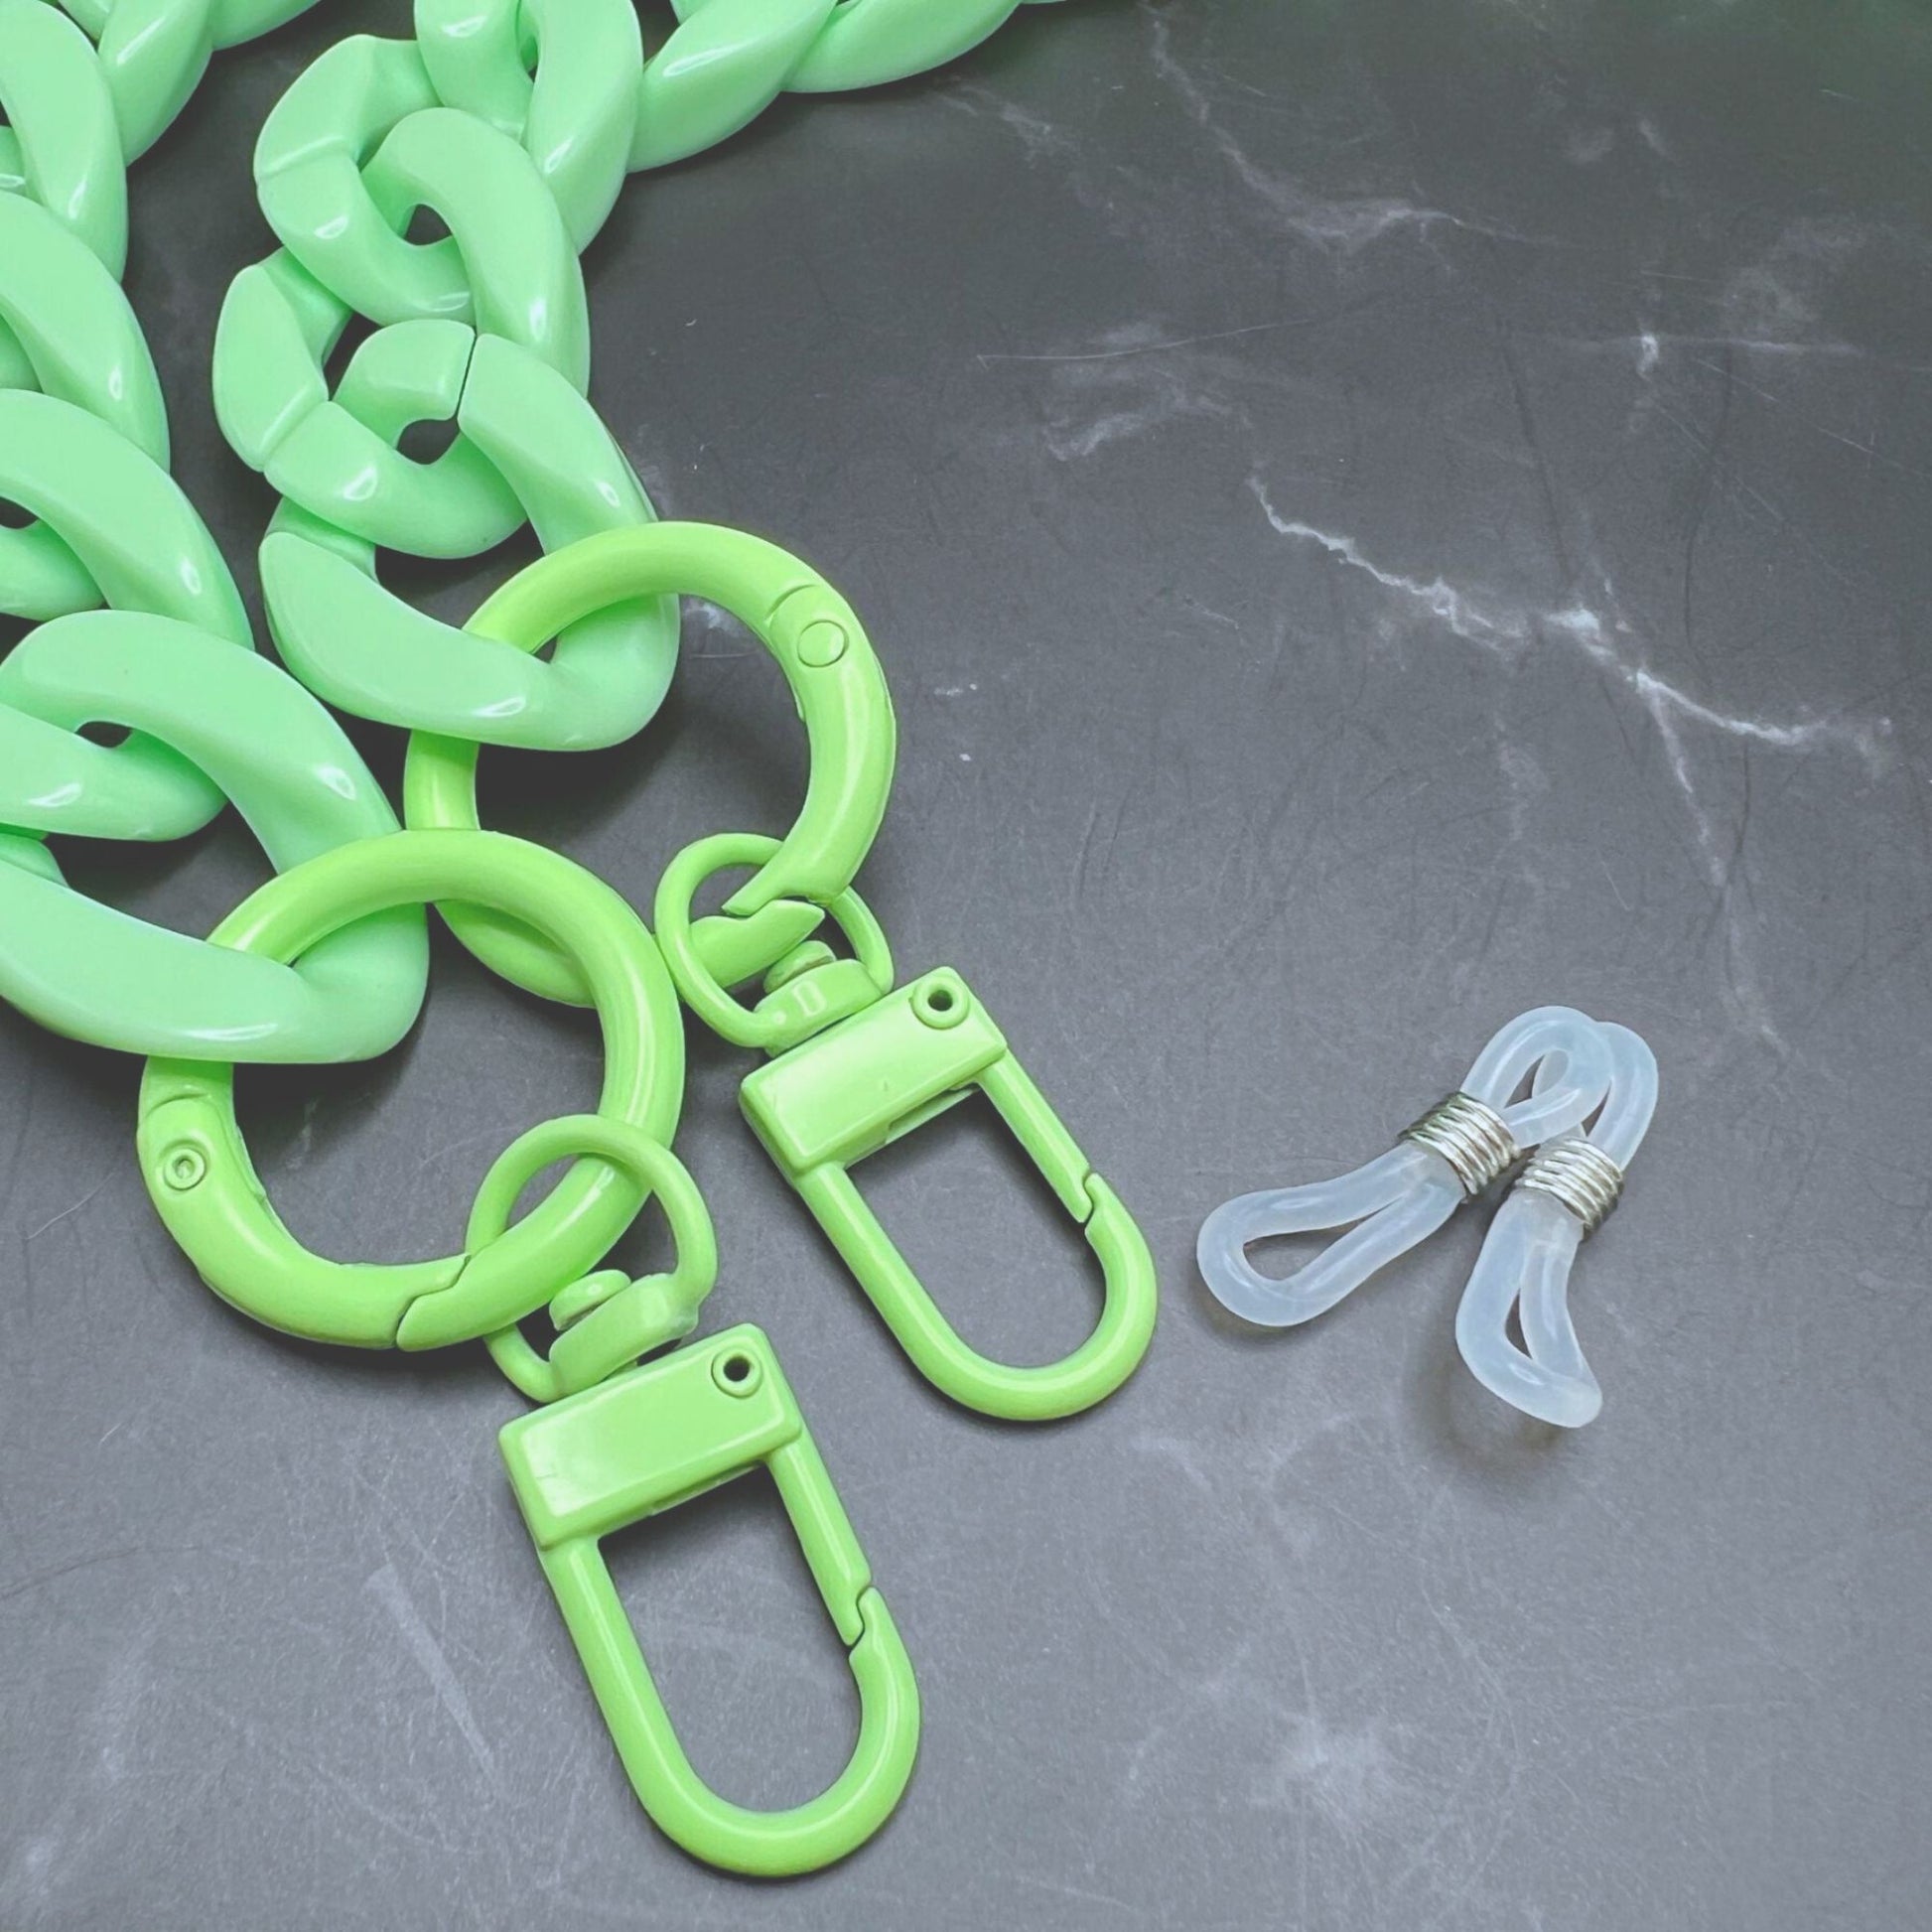 Versatile Green Chunky Chain Link Lanyard for glasses, keys, badges, or masks.  Close up of the rubber glasses rings.